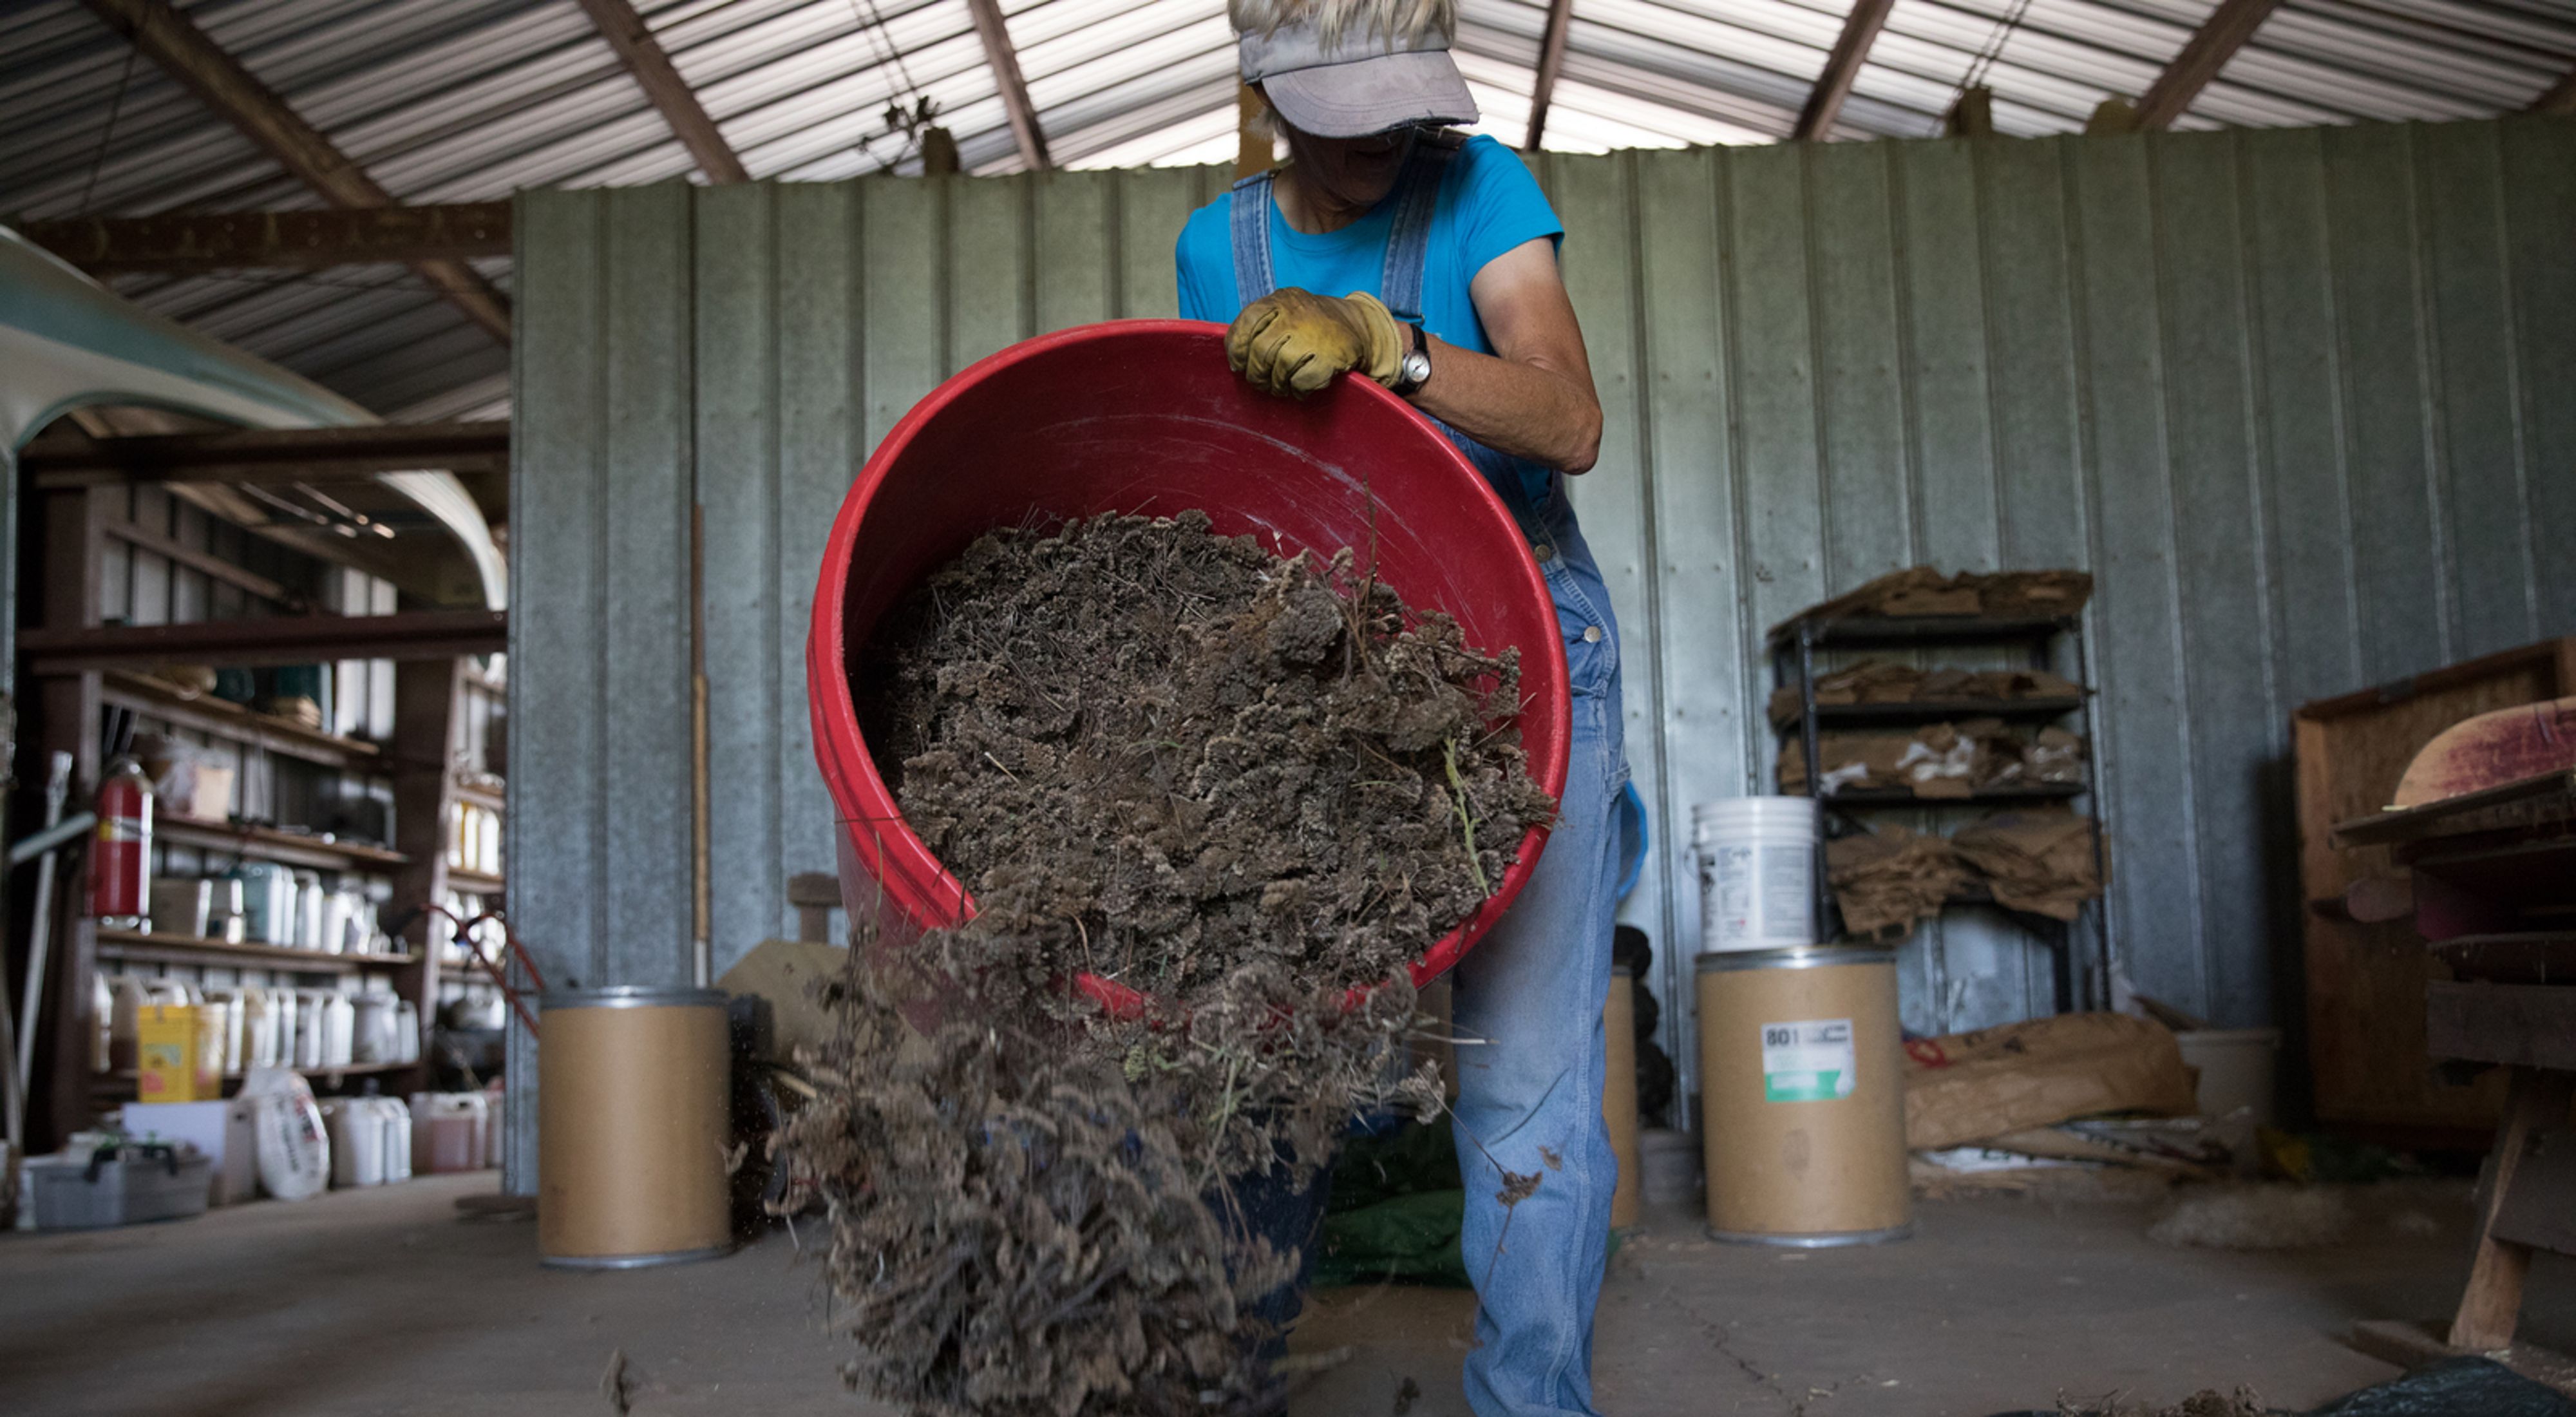 A volunteer works in a storage barn to spread harvested yarrow from a large red bucket.